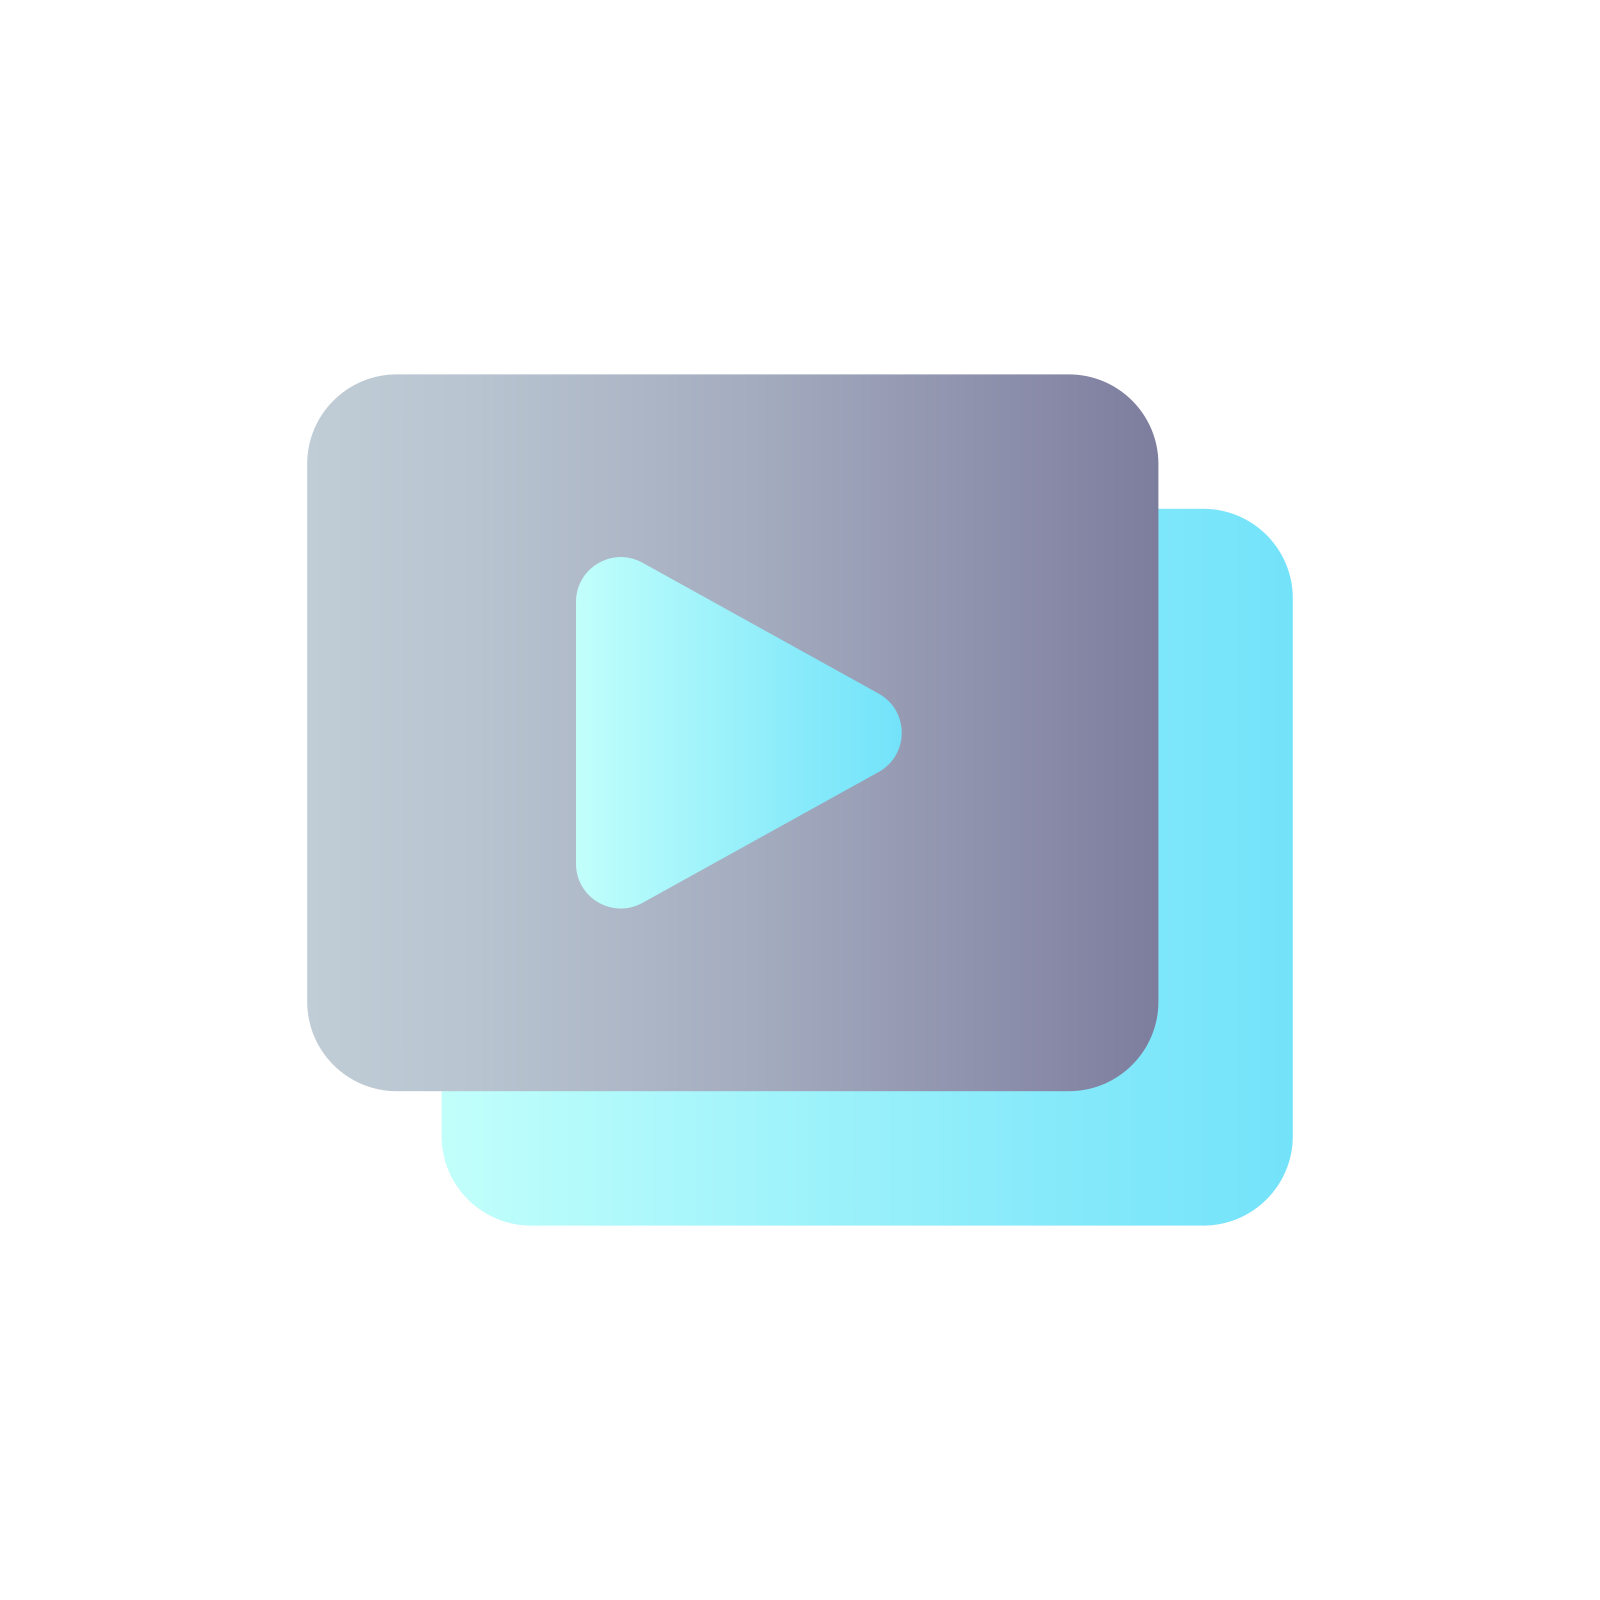 external-Set-Of-Video-Files-photo-and-video-flat-glyph-papa-vector icon